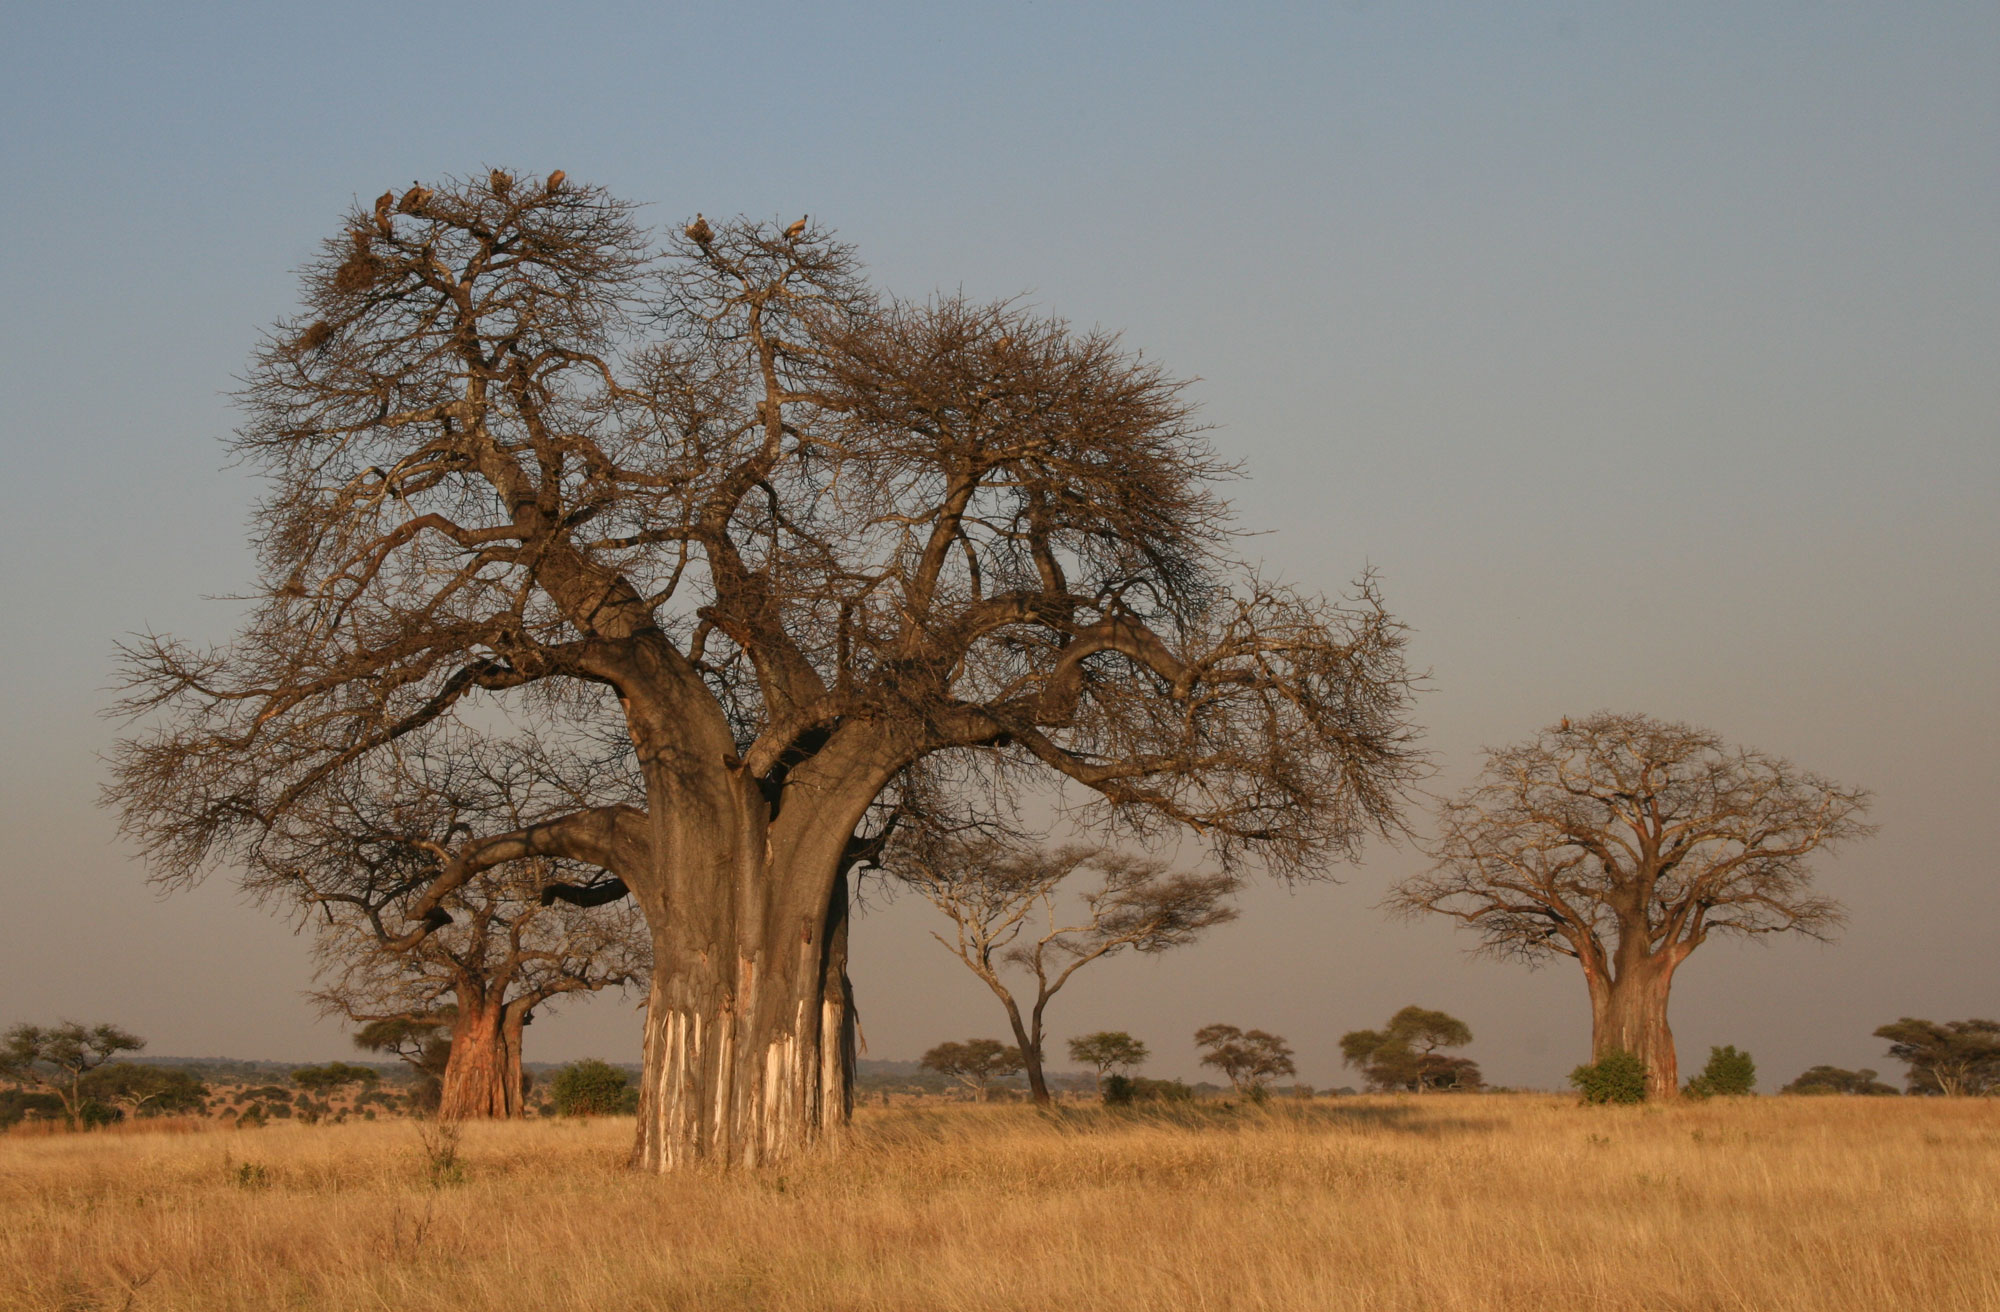 Photograph showing savanna biome in Tarangire National Park, Tanzania. The photo shows large baobab trees with thick trunks in the foreground and acacias in the background. The trees are widely spaced on a flat landscape with yellow grass.